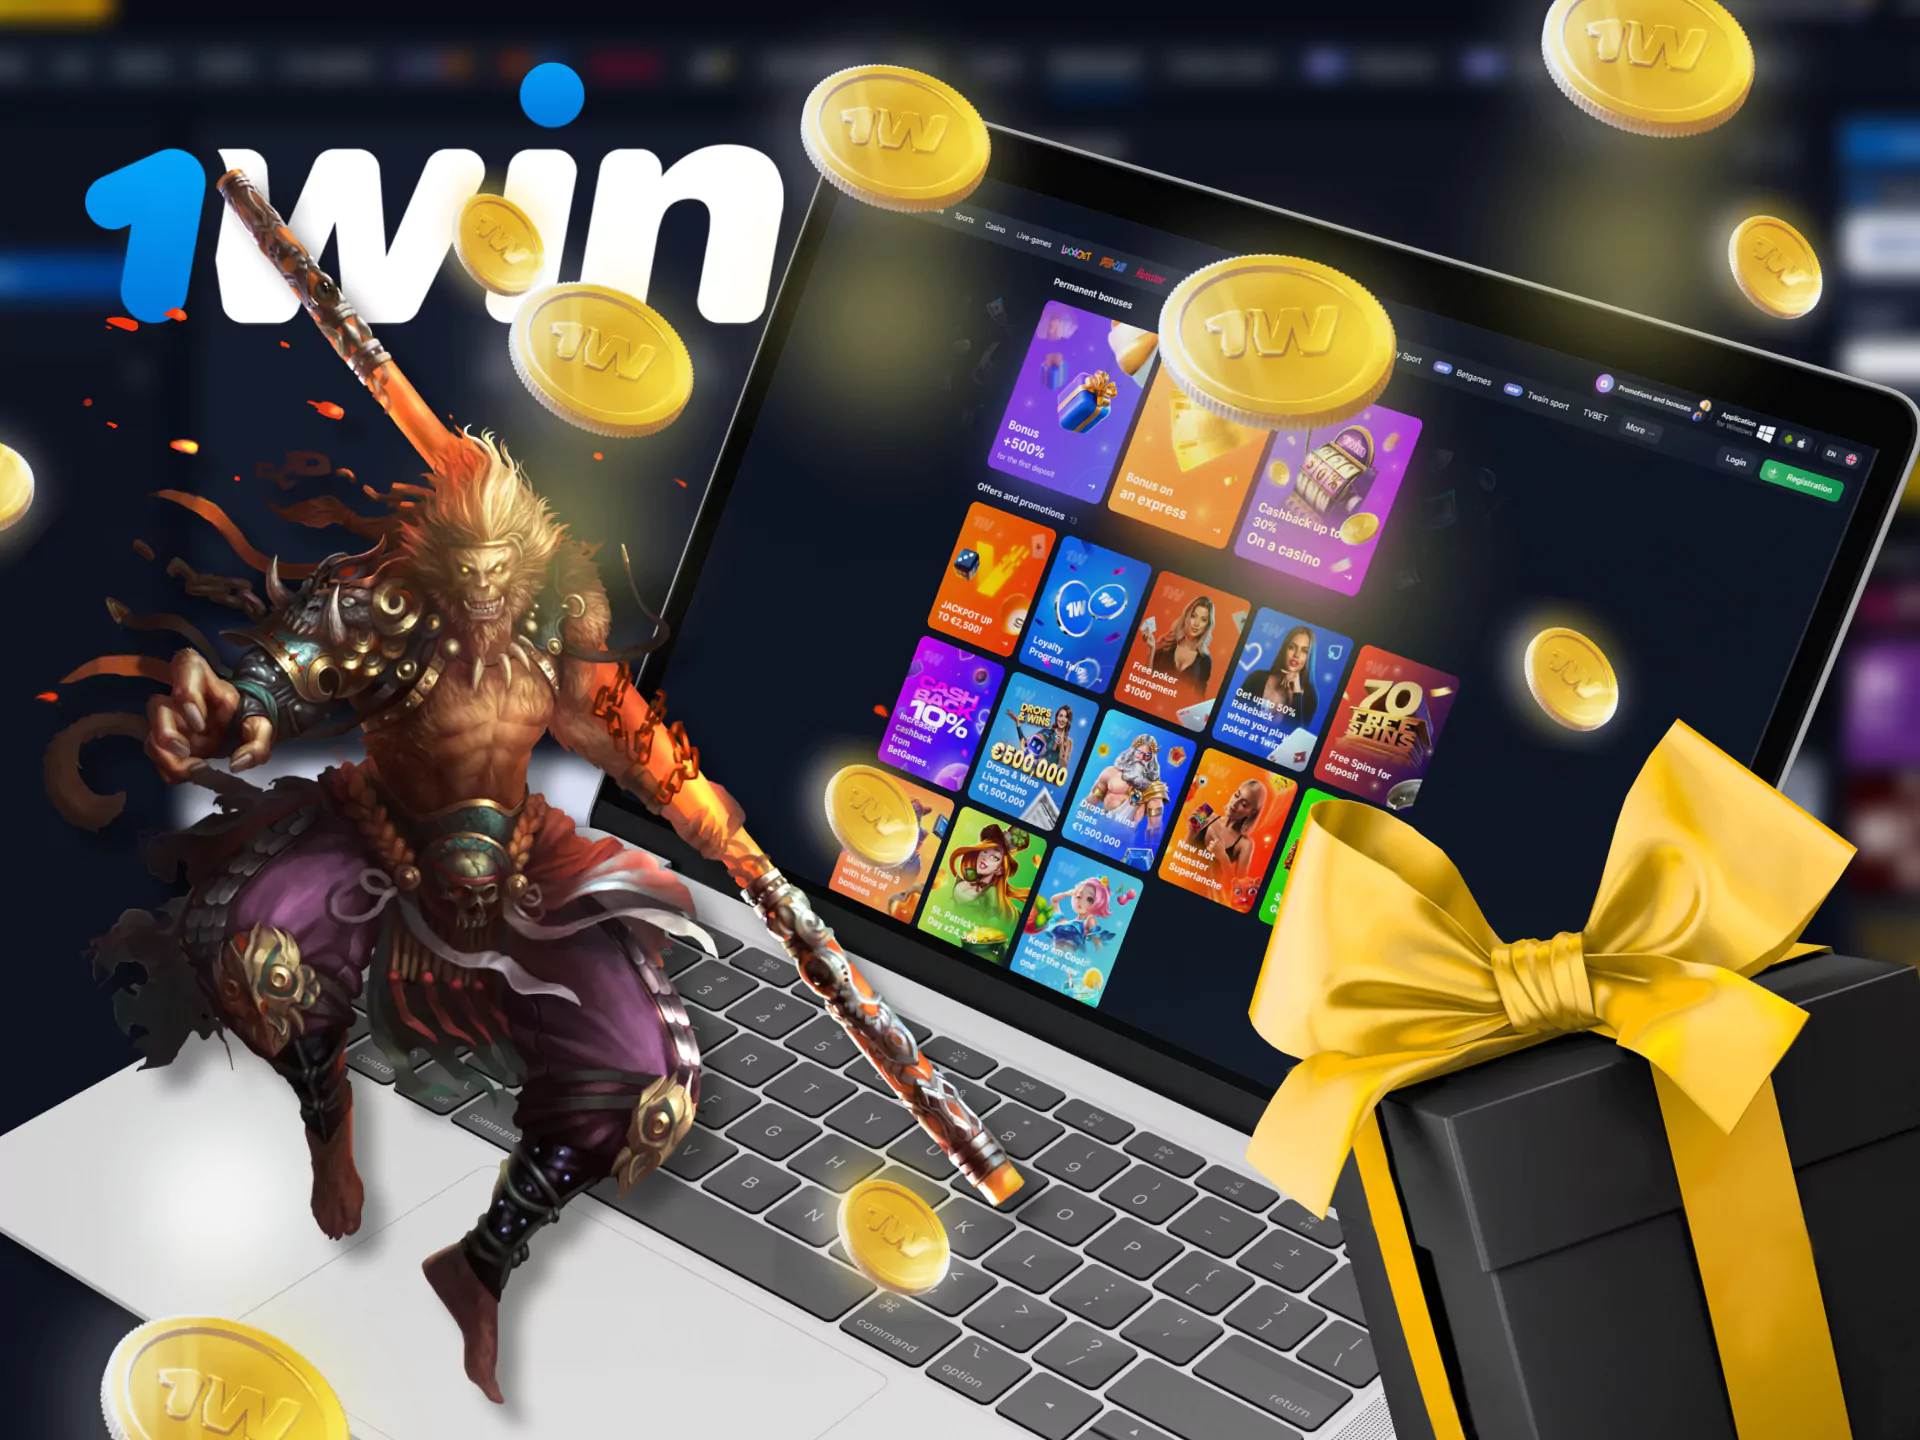 At 1Win, get a special bonus for betting.